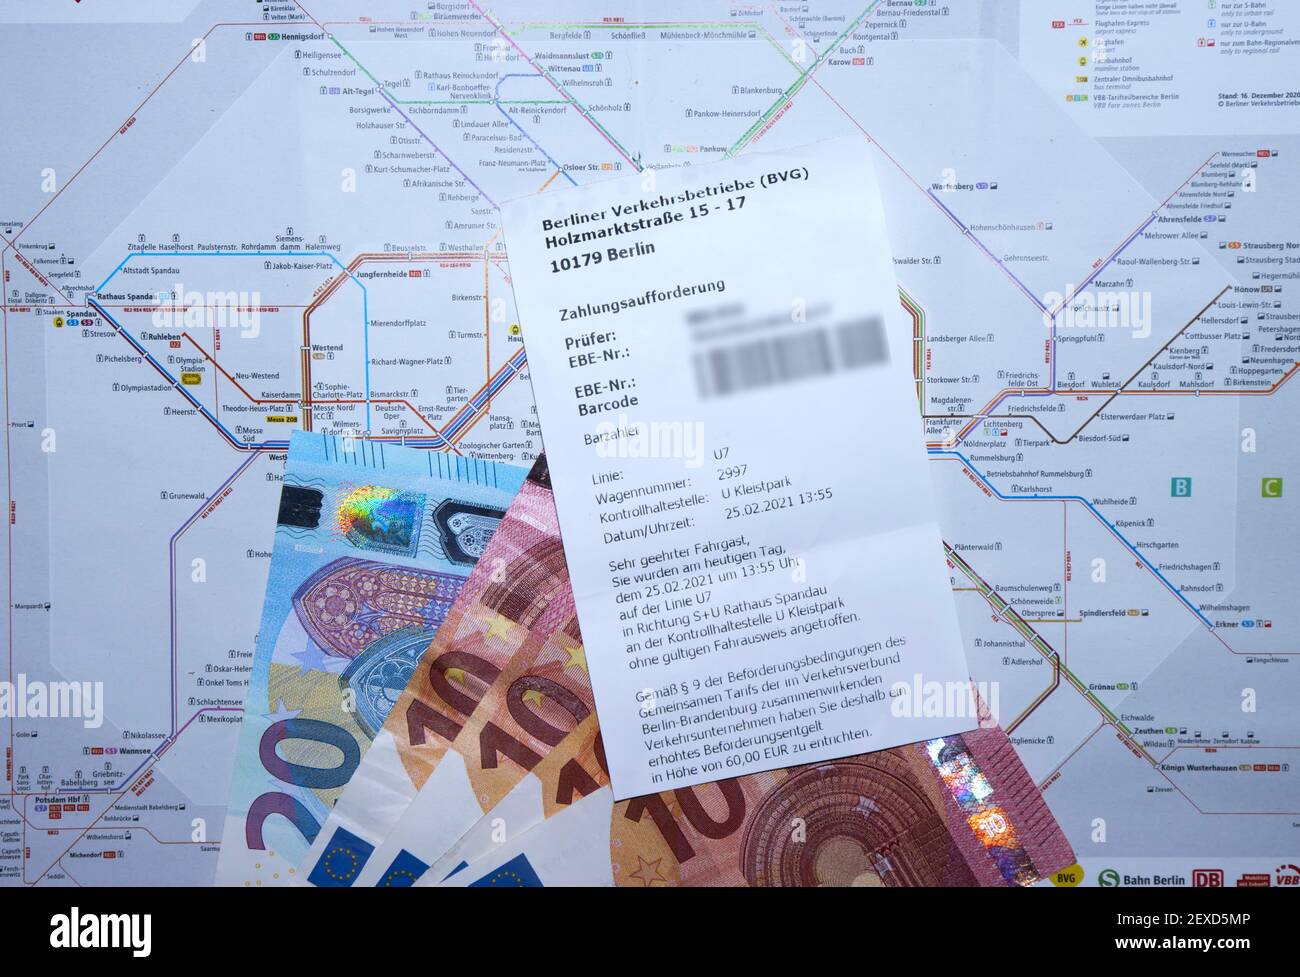 Receipt of the BVG, payed 60 Euros for travel without paying for the ticket Stock Photo